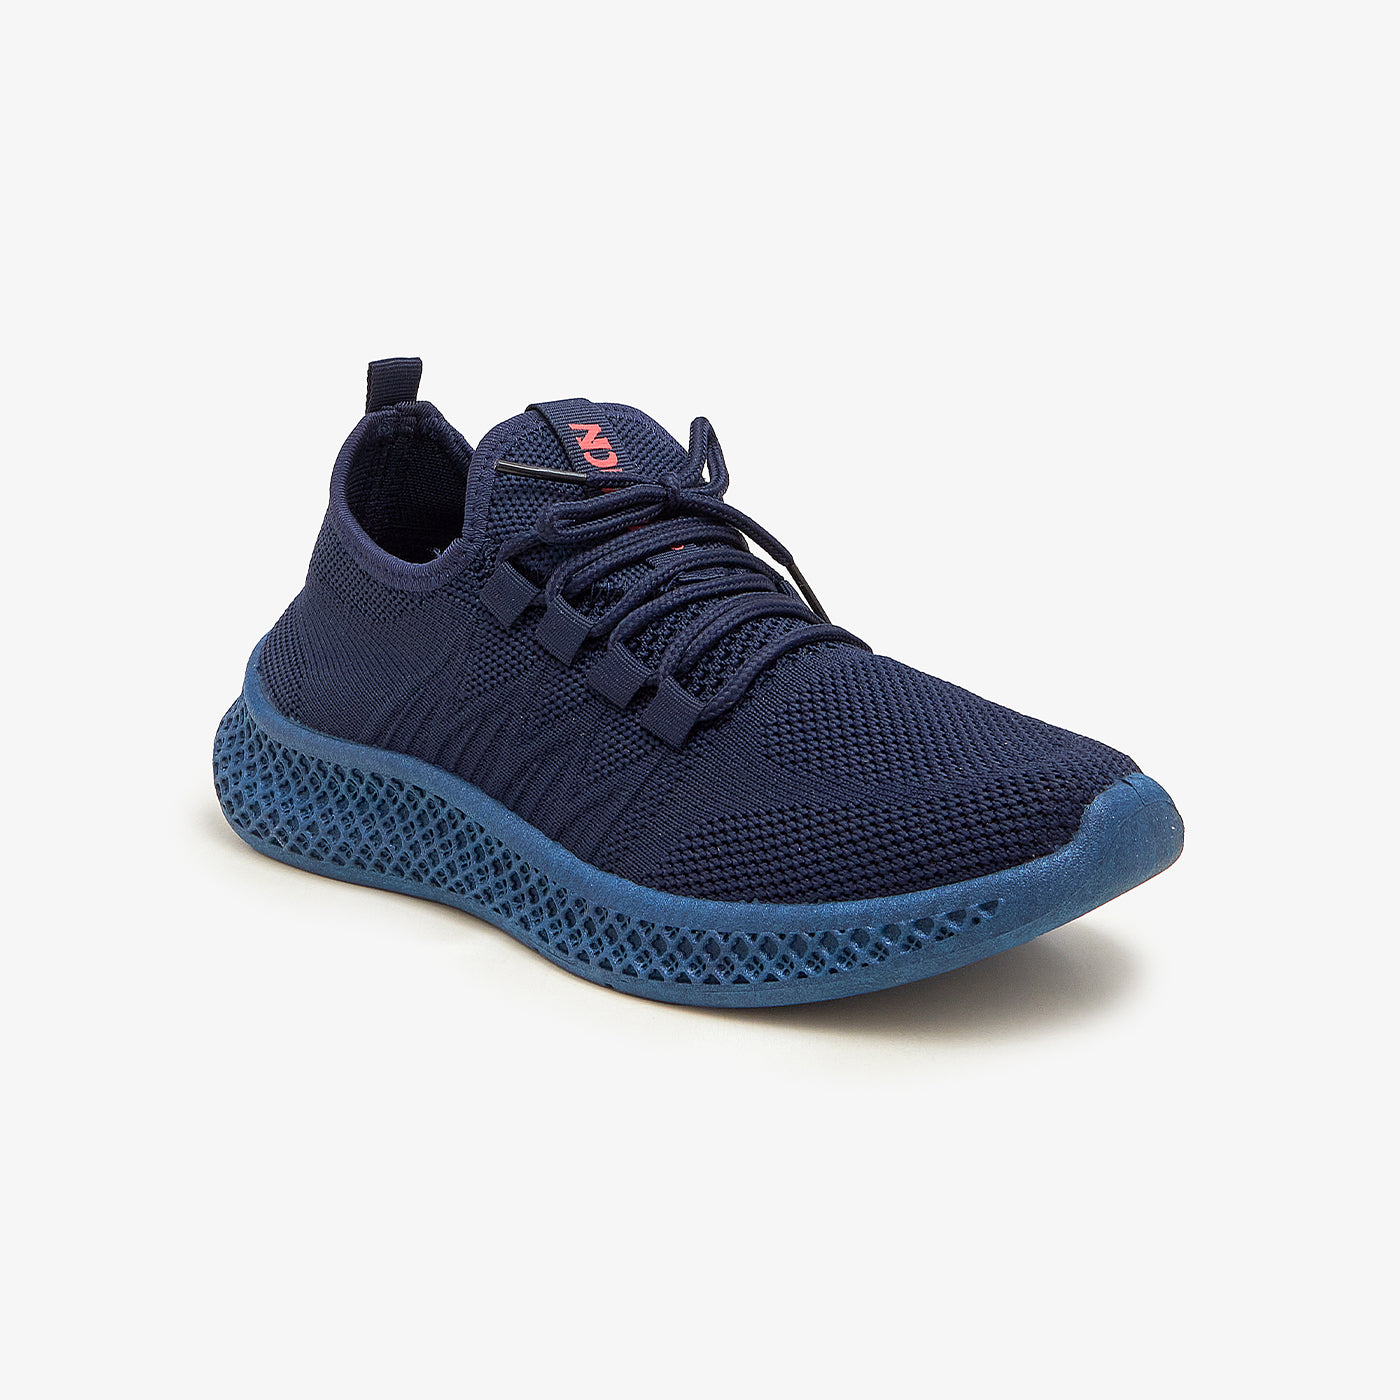 Boys Solid Colored Sneakers